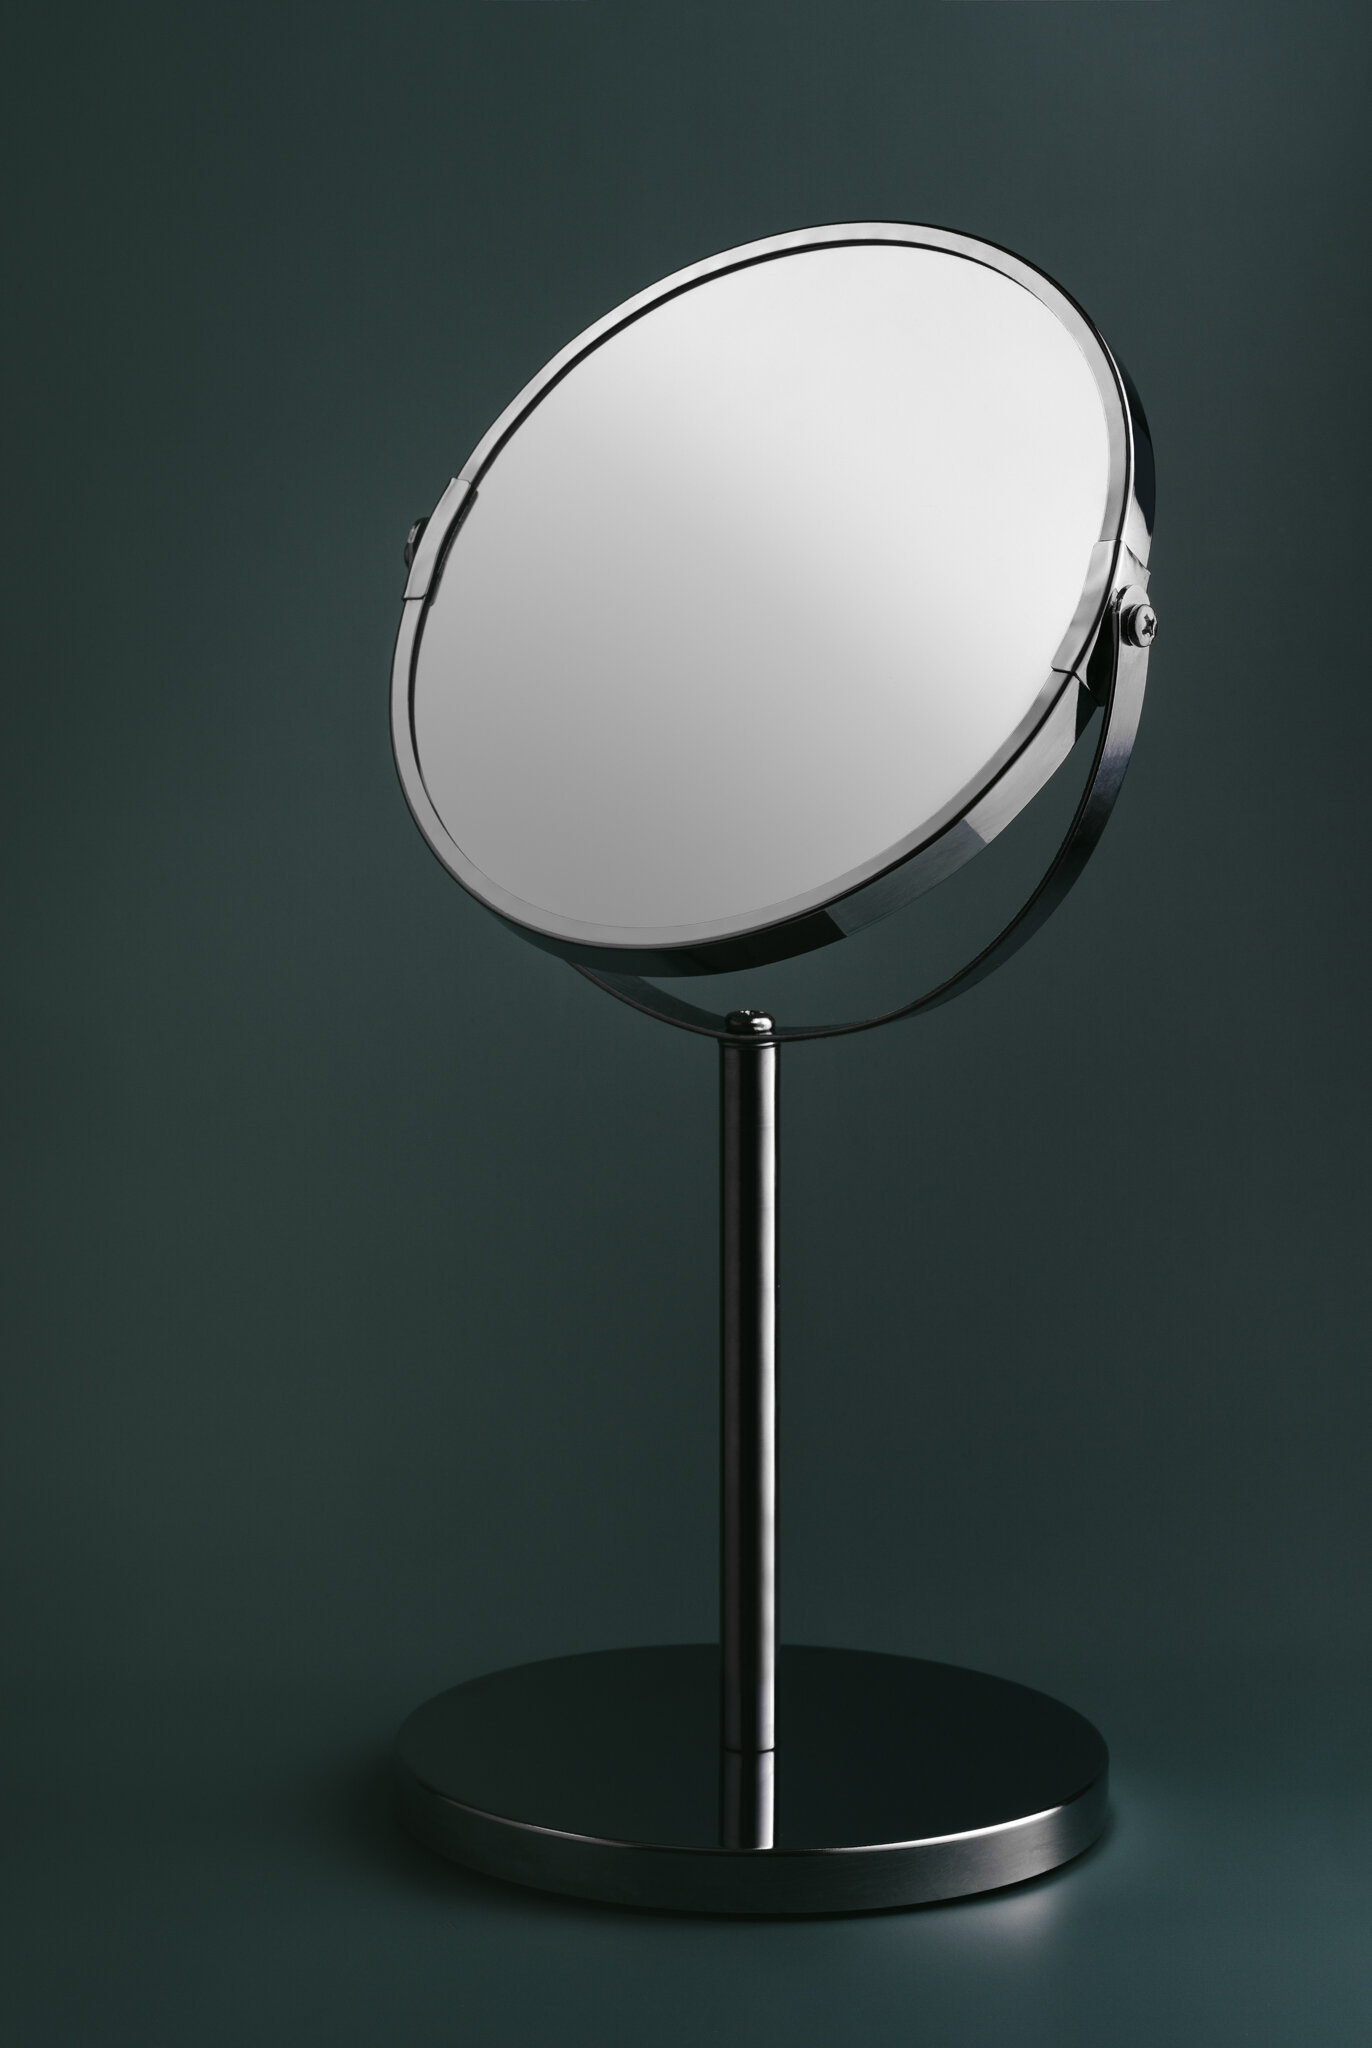 Mirror Product photography by Lee Starnes, Product Photographer based in Ho Chi Minh City, Vietnam